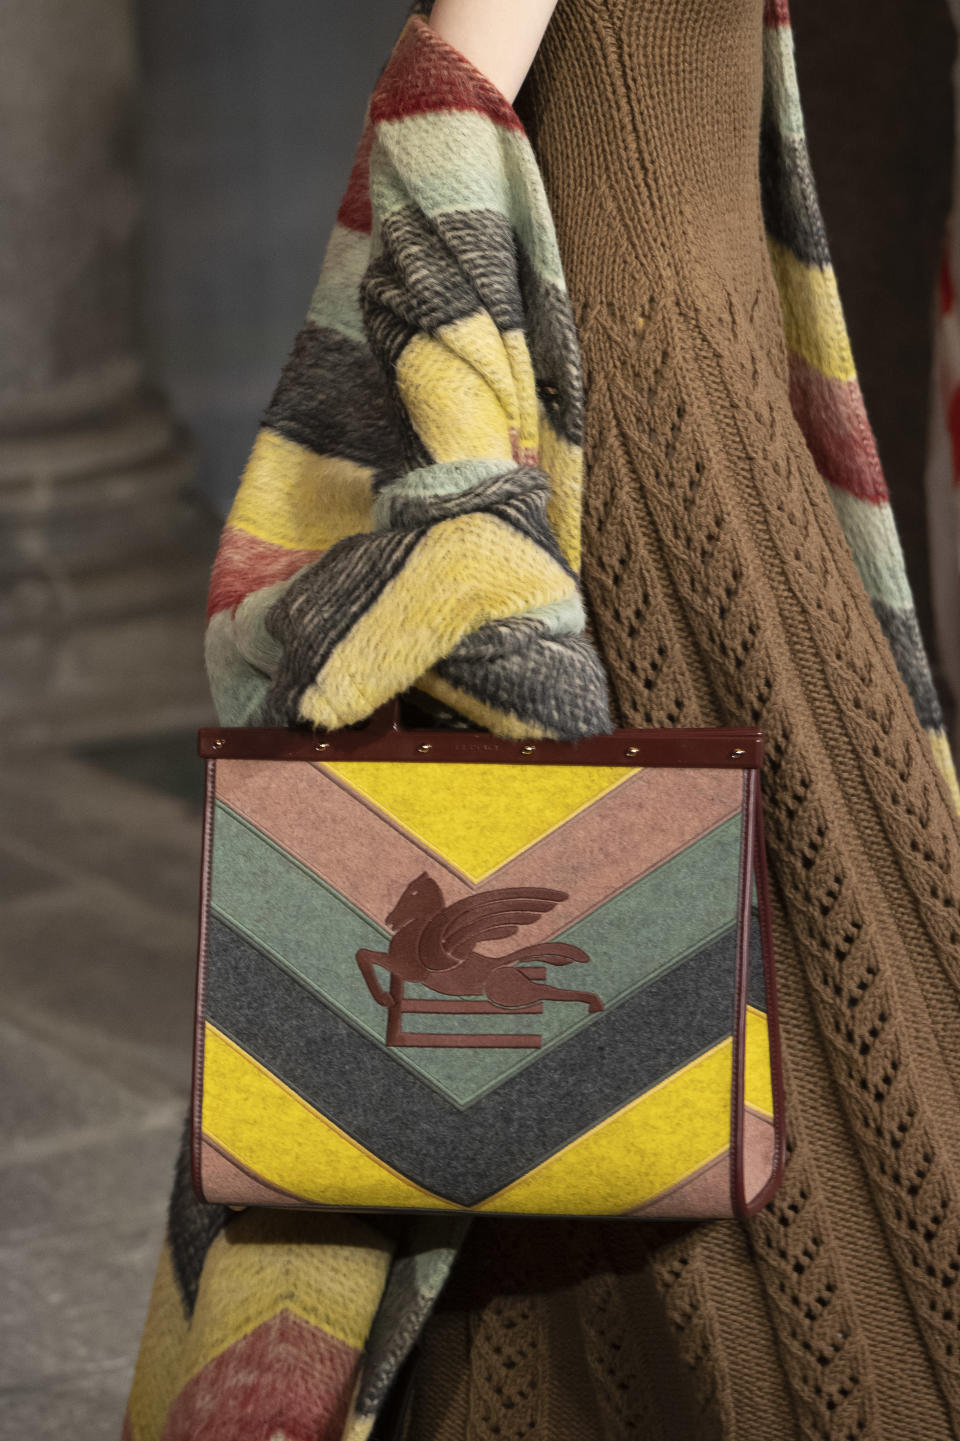 A Suede Striped Bag And Matching Knitwear From Etro Fall Winter ’23. - Credit: Gamma-Rapho Via Getty Images